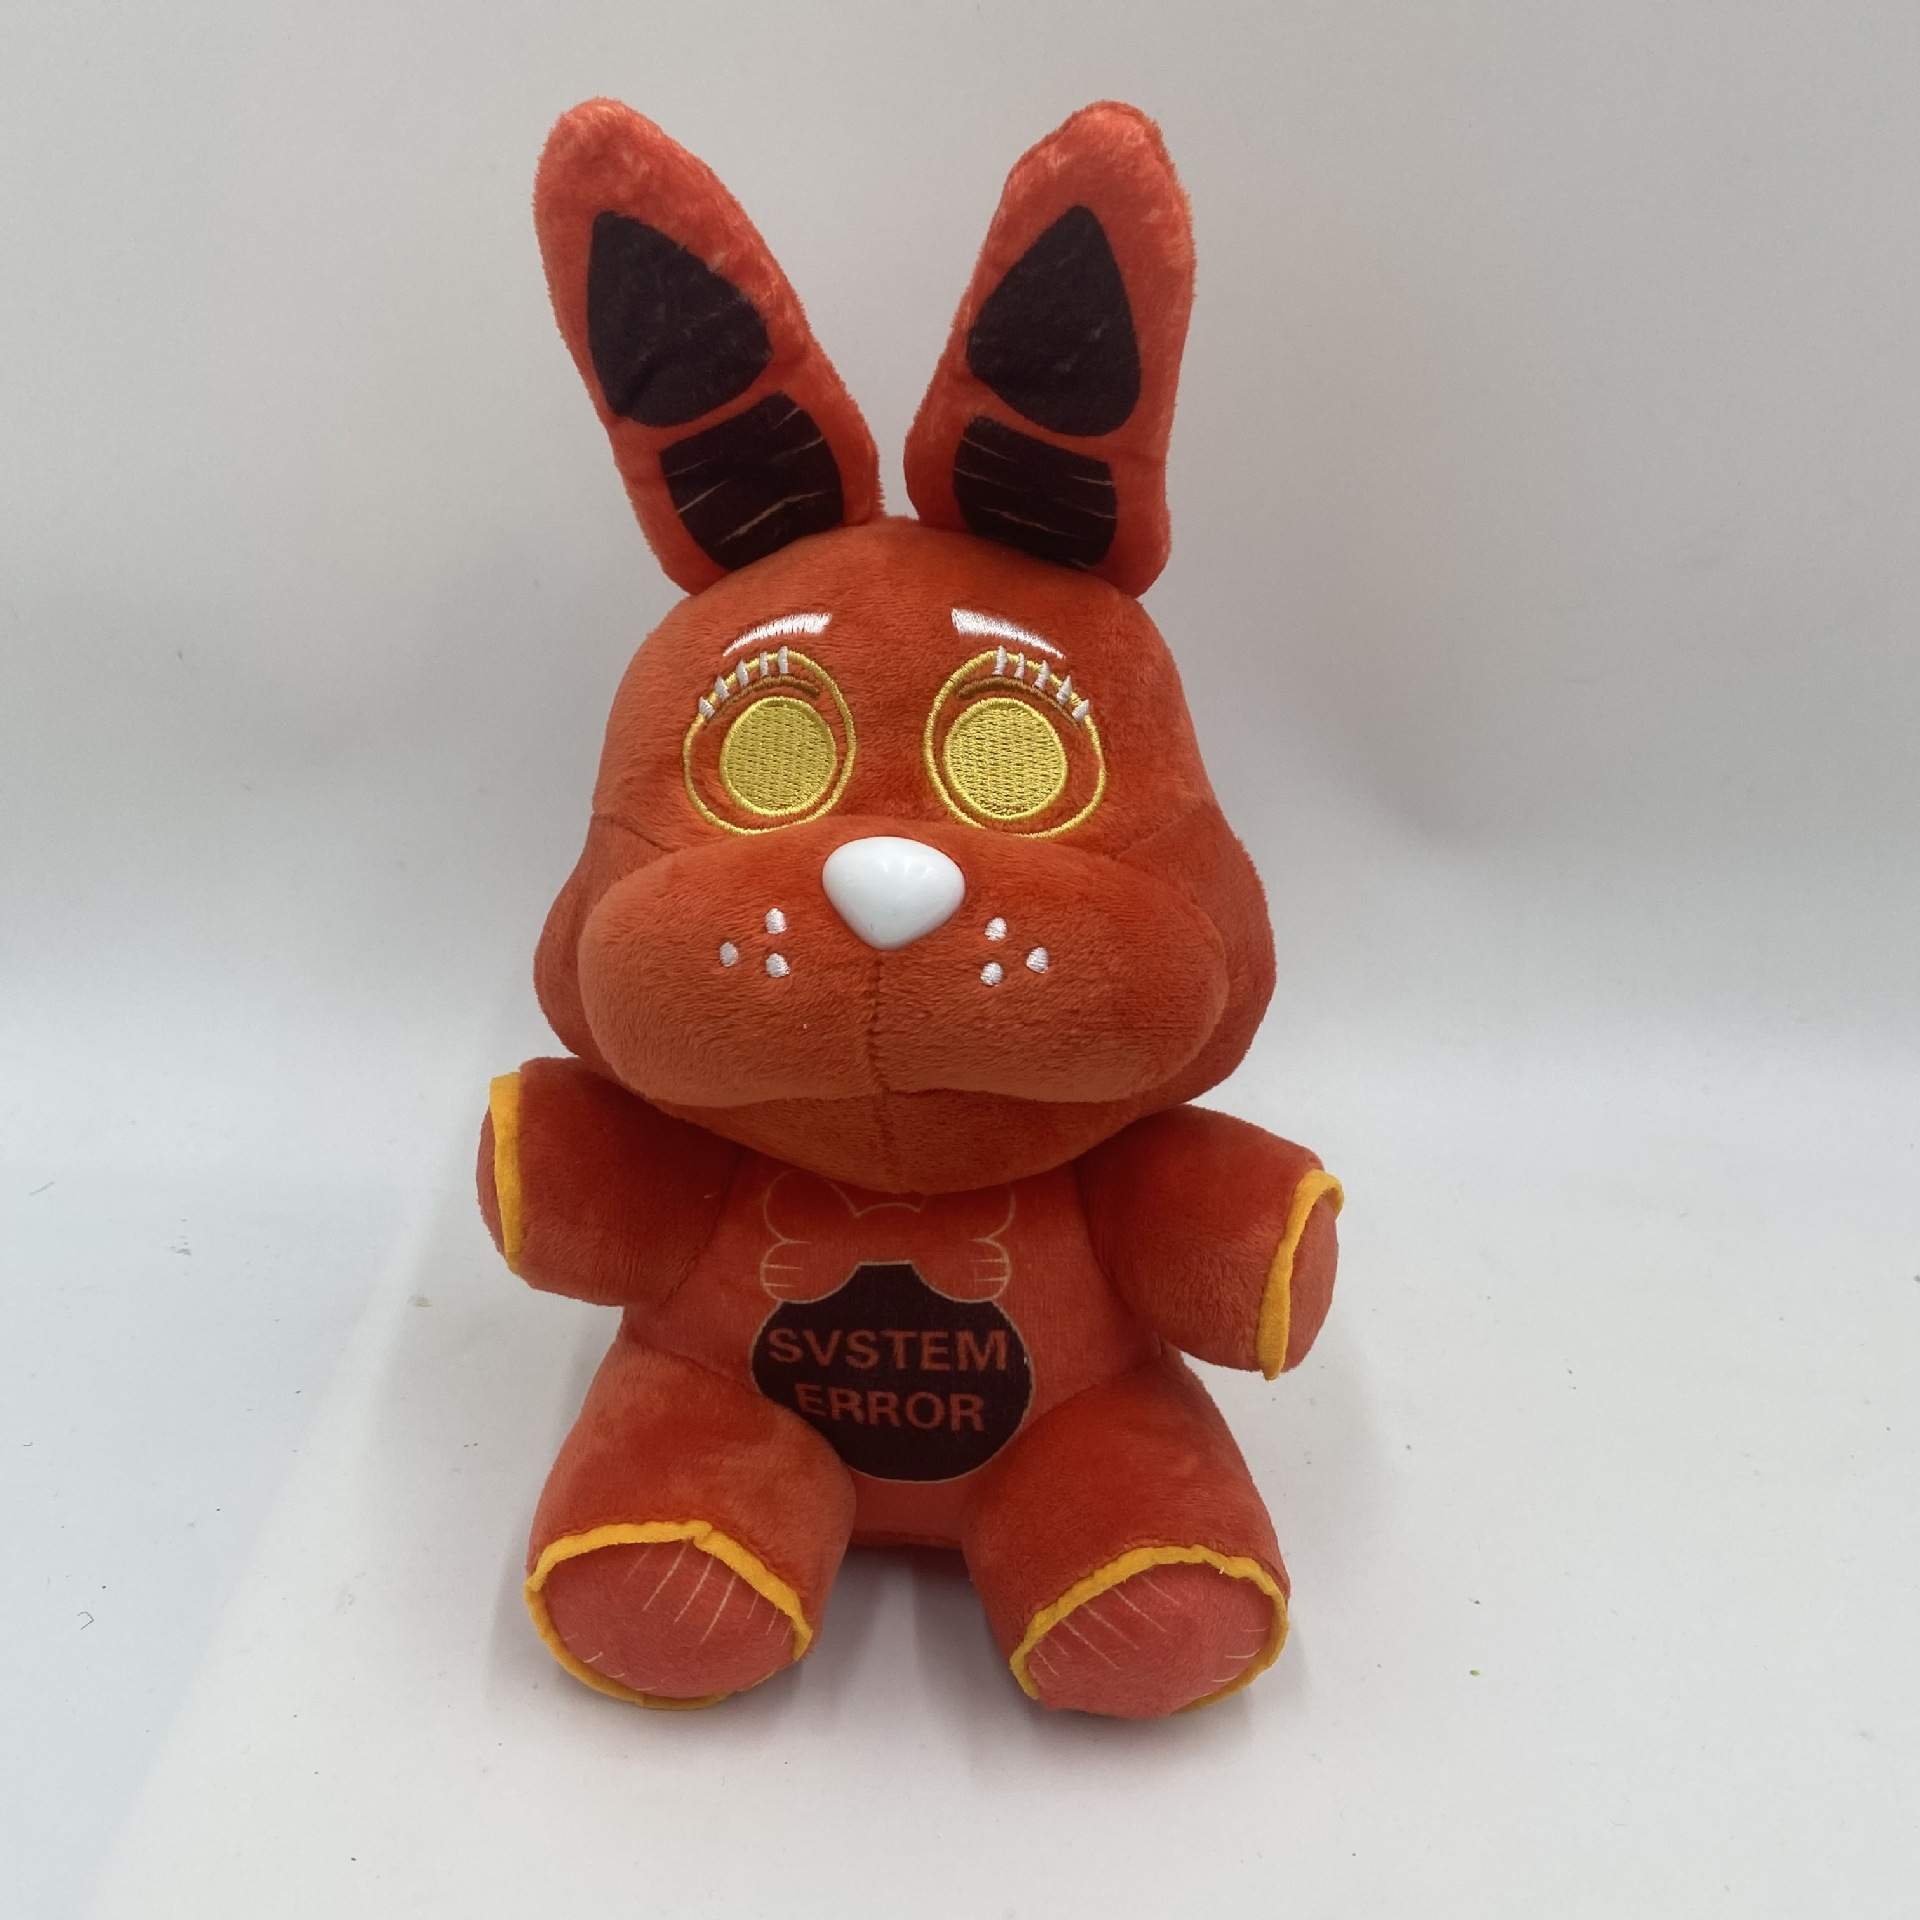 Comfortable And Soft Game Plush Foxy Animal Plushies for Everyone